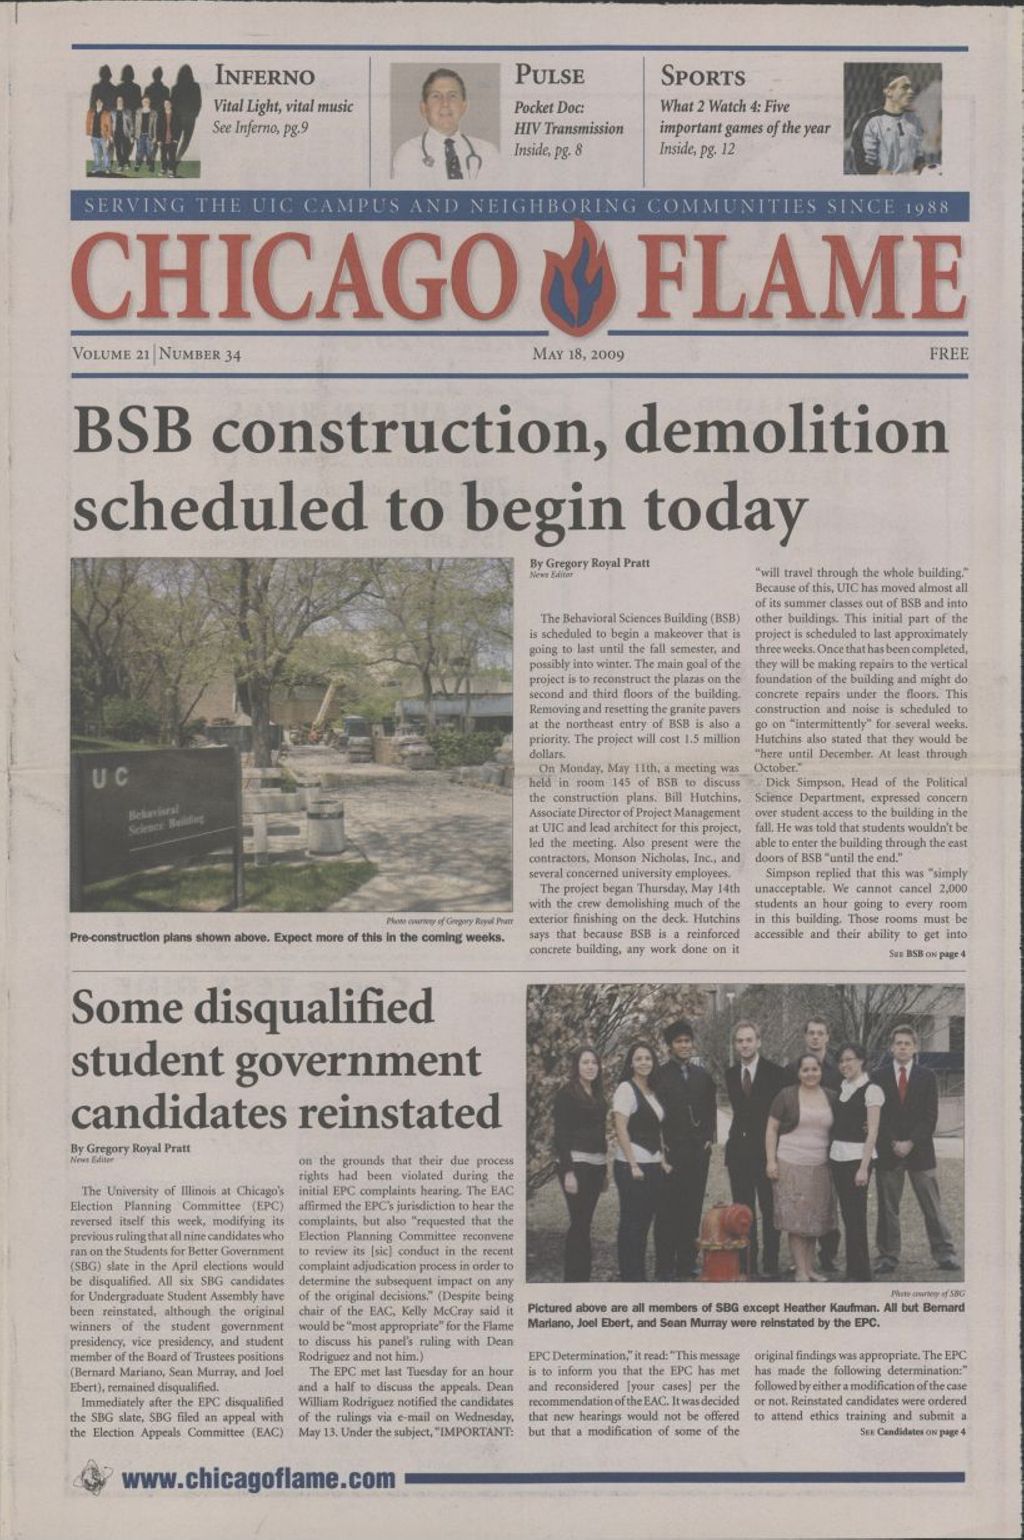 Chicago Flame (May 18, 2009)